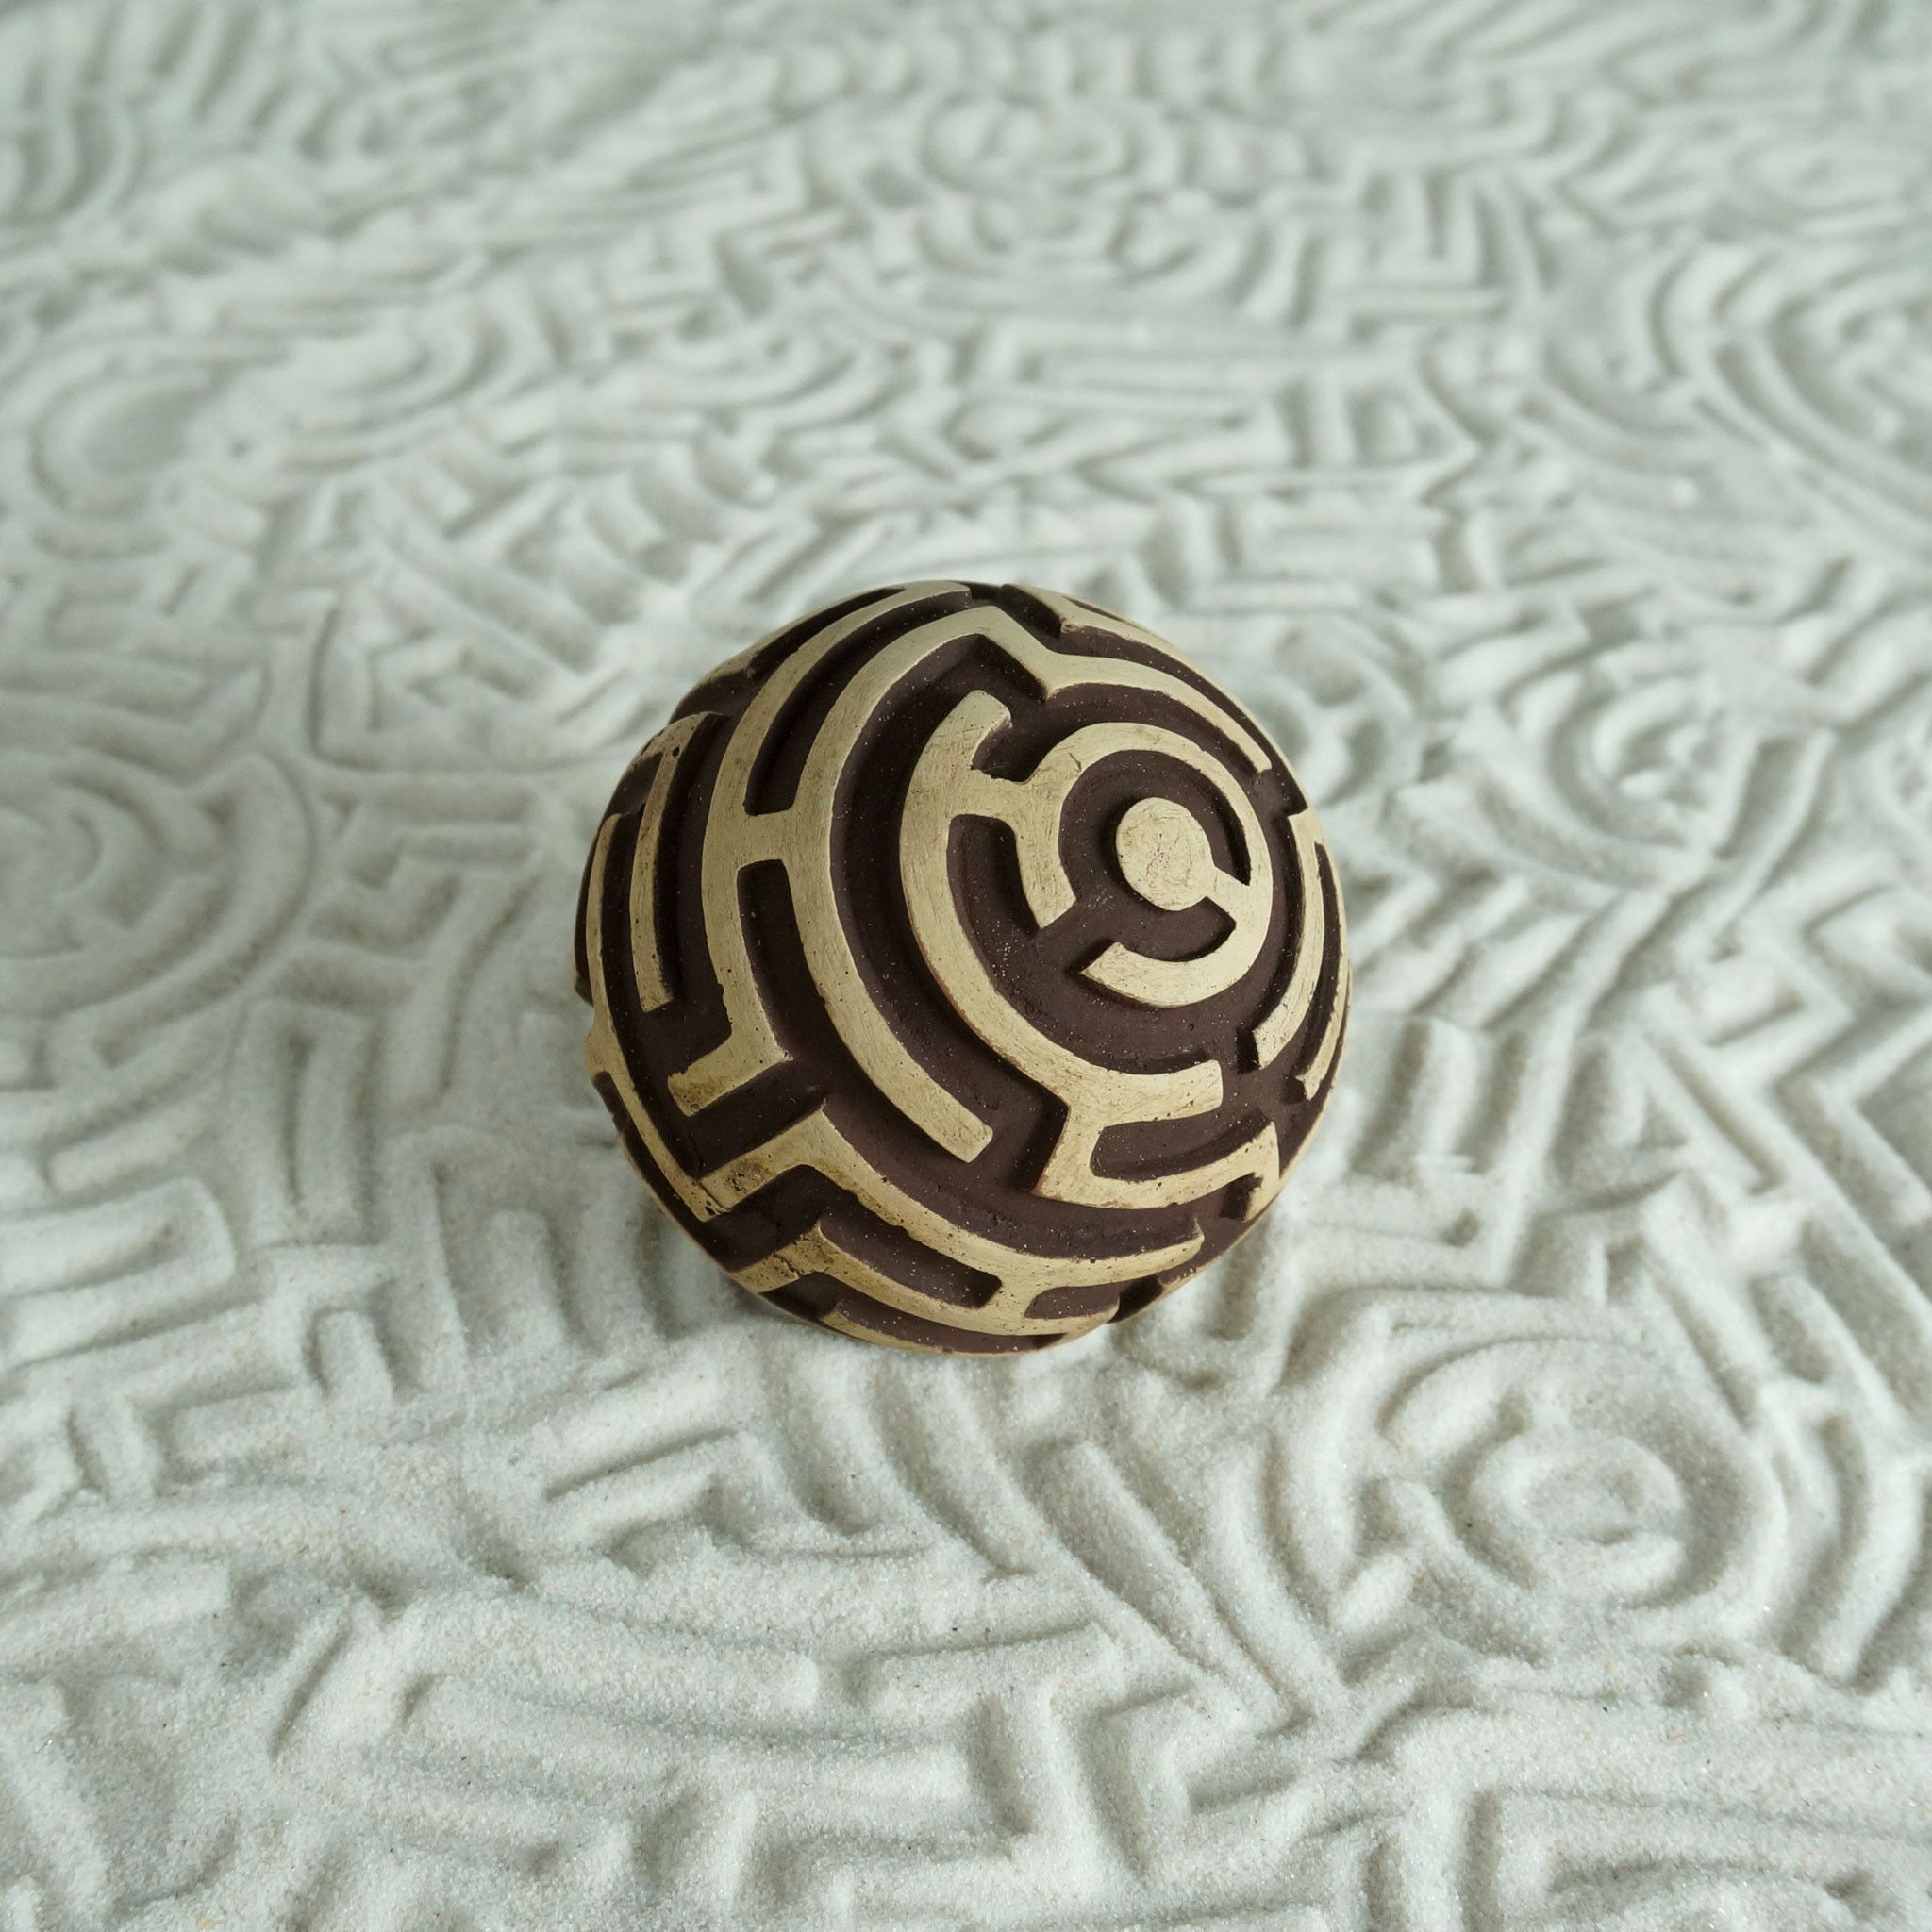 The Maze is A-Mazing! Corny puns aside, this sphere has a real maze ...